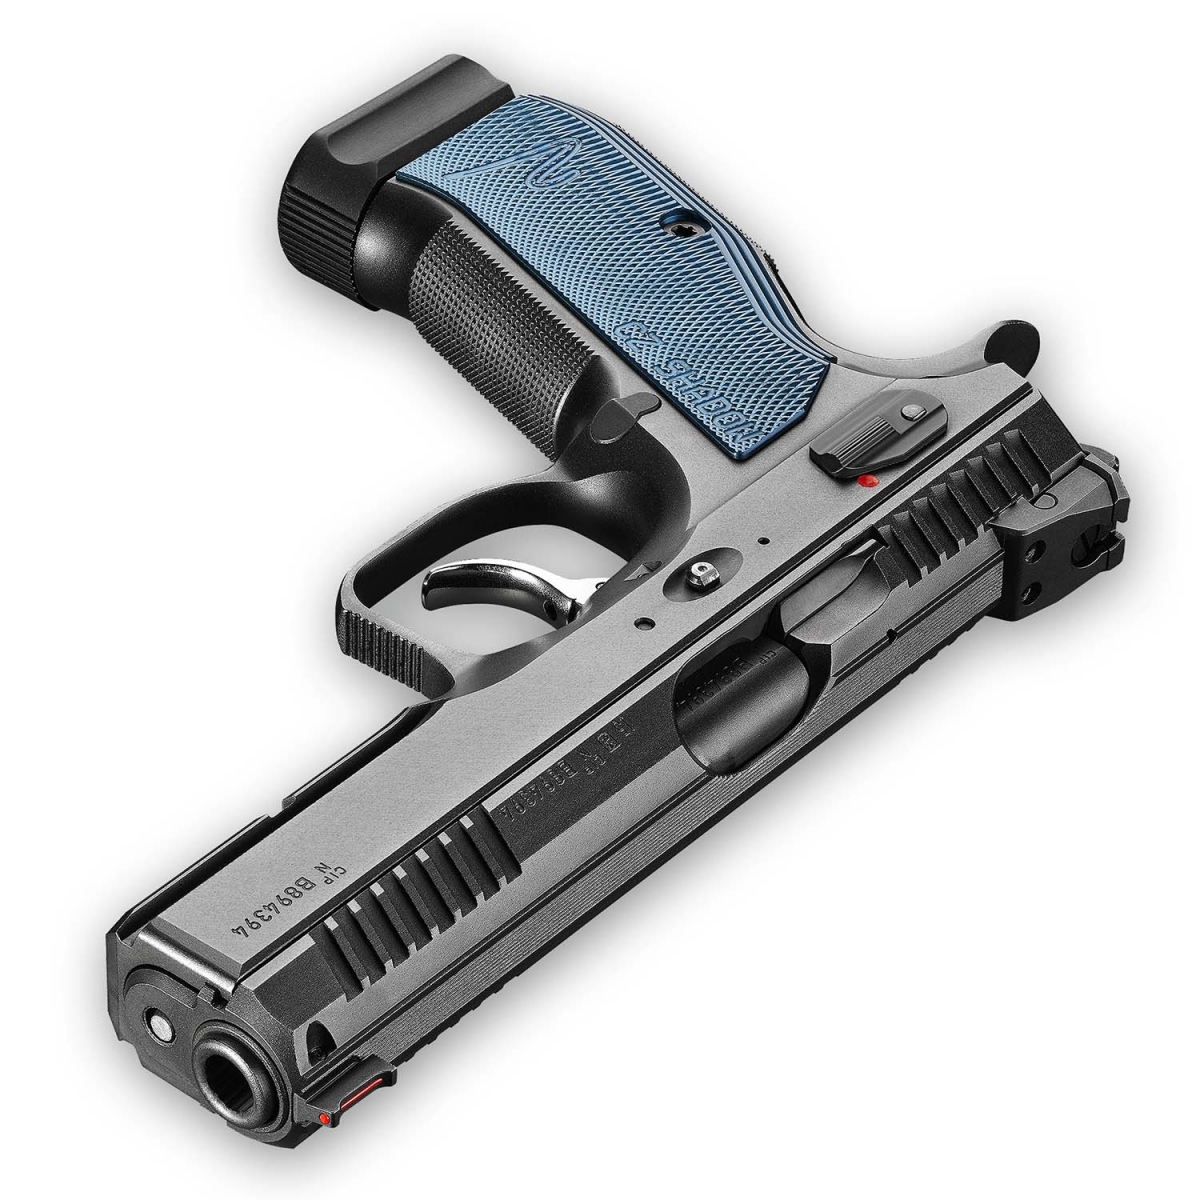 The new CZ Shadow 2 competition pistol